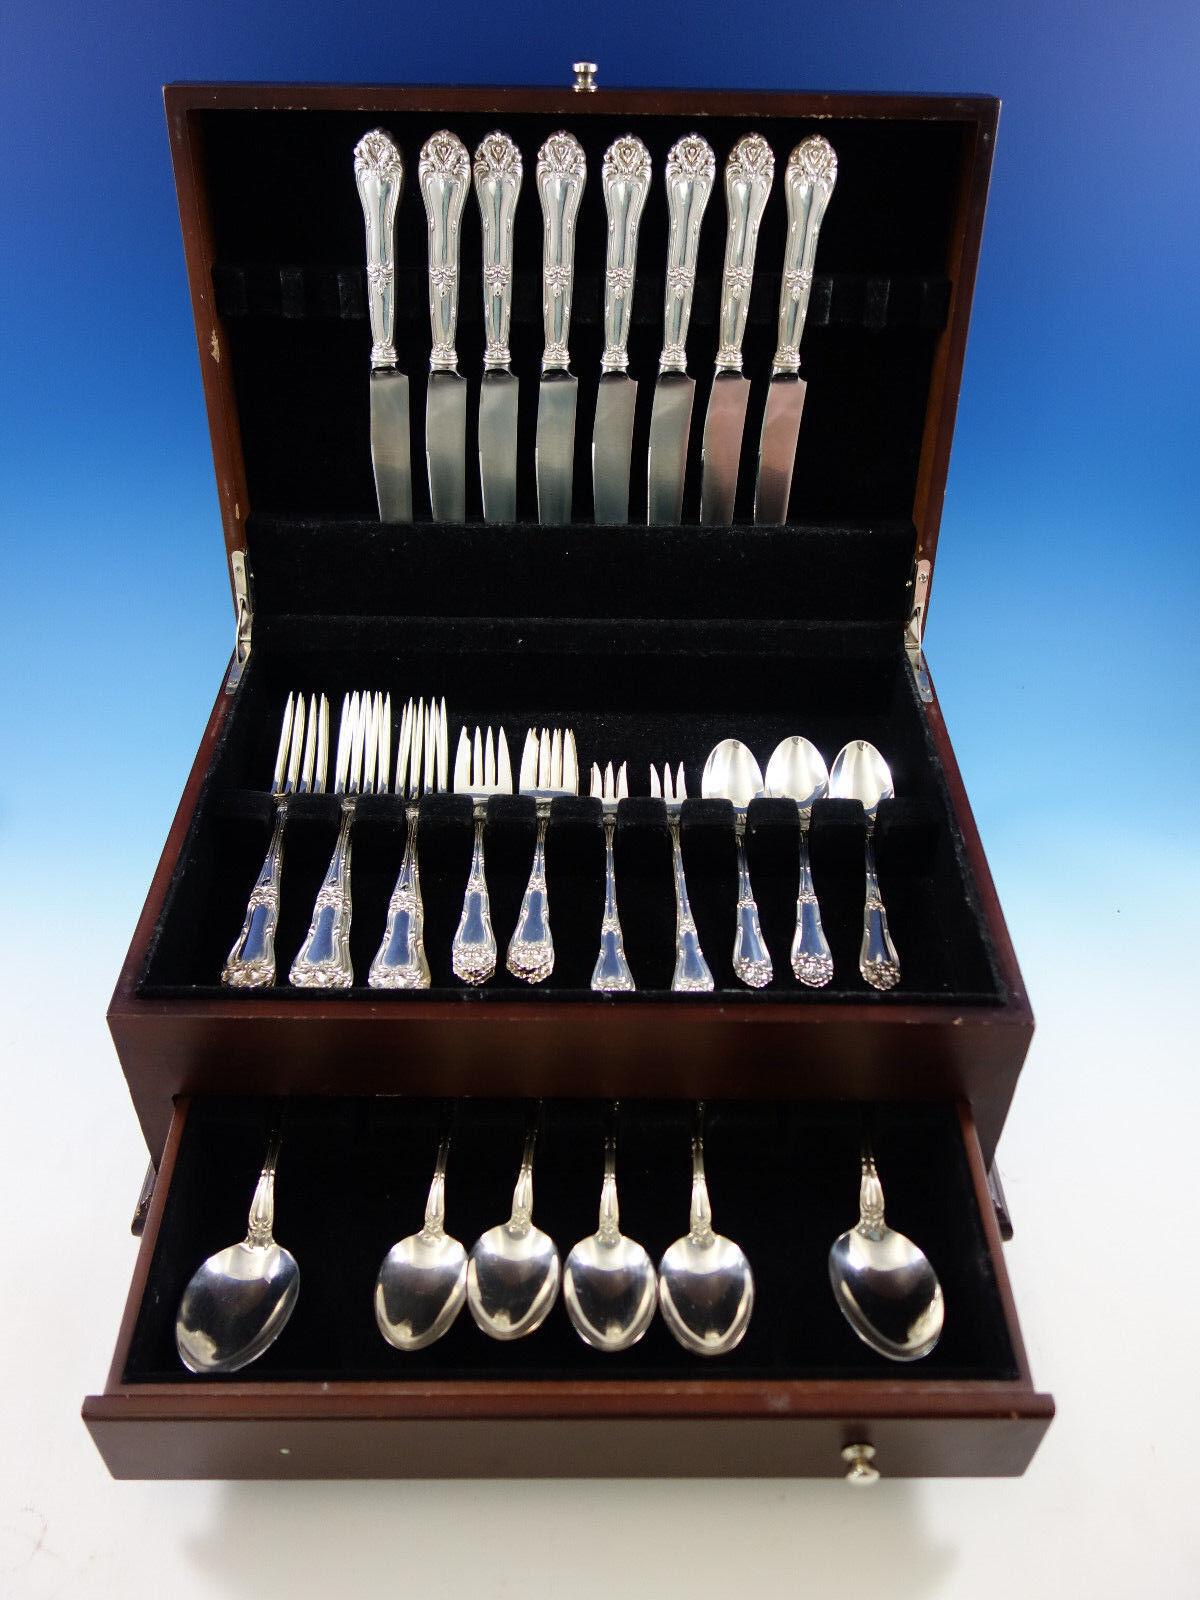 Dinner size champlain by Frank Whiting sterling silver flatware set - 50 pieces. This set includes:

8 Dinner size knives, 9 3/4